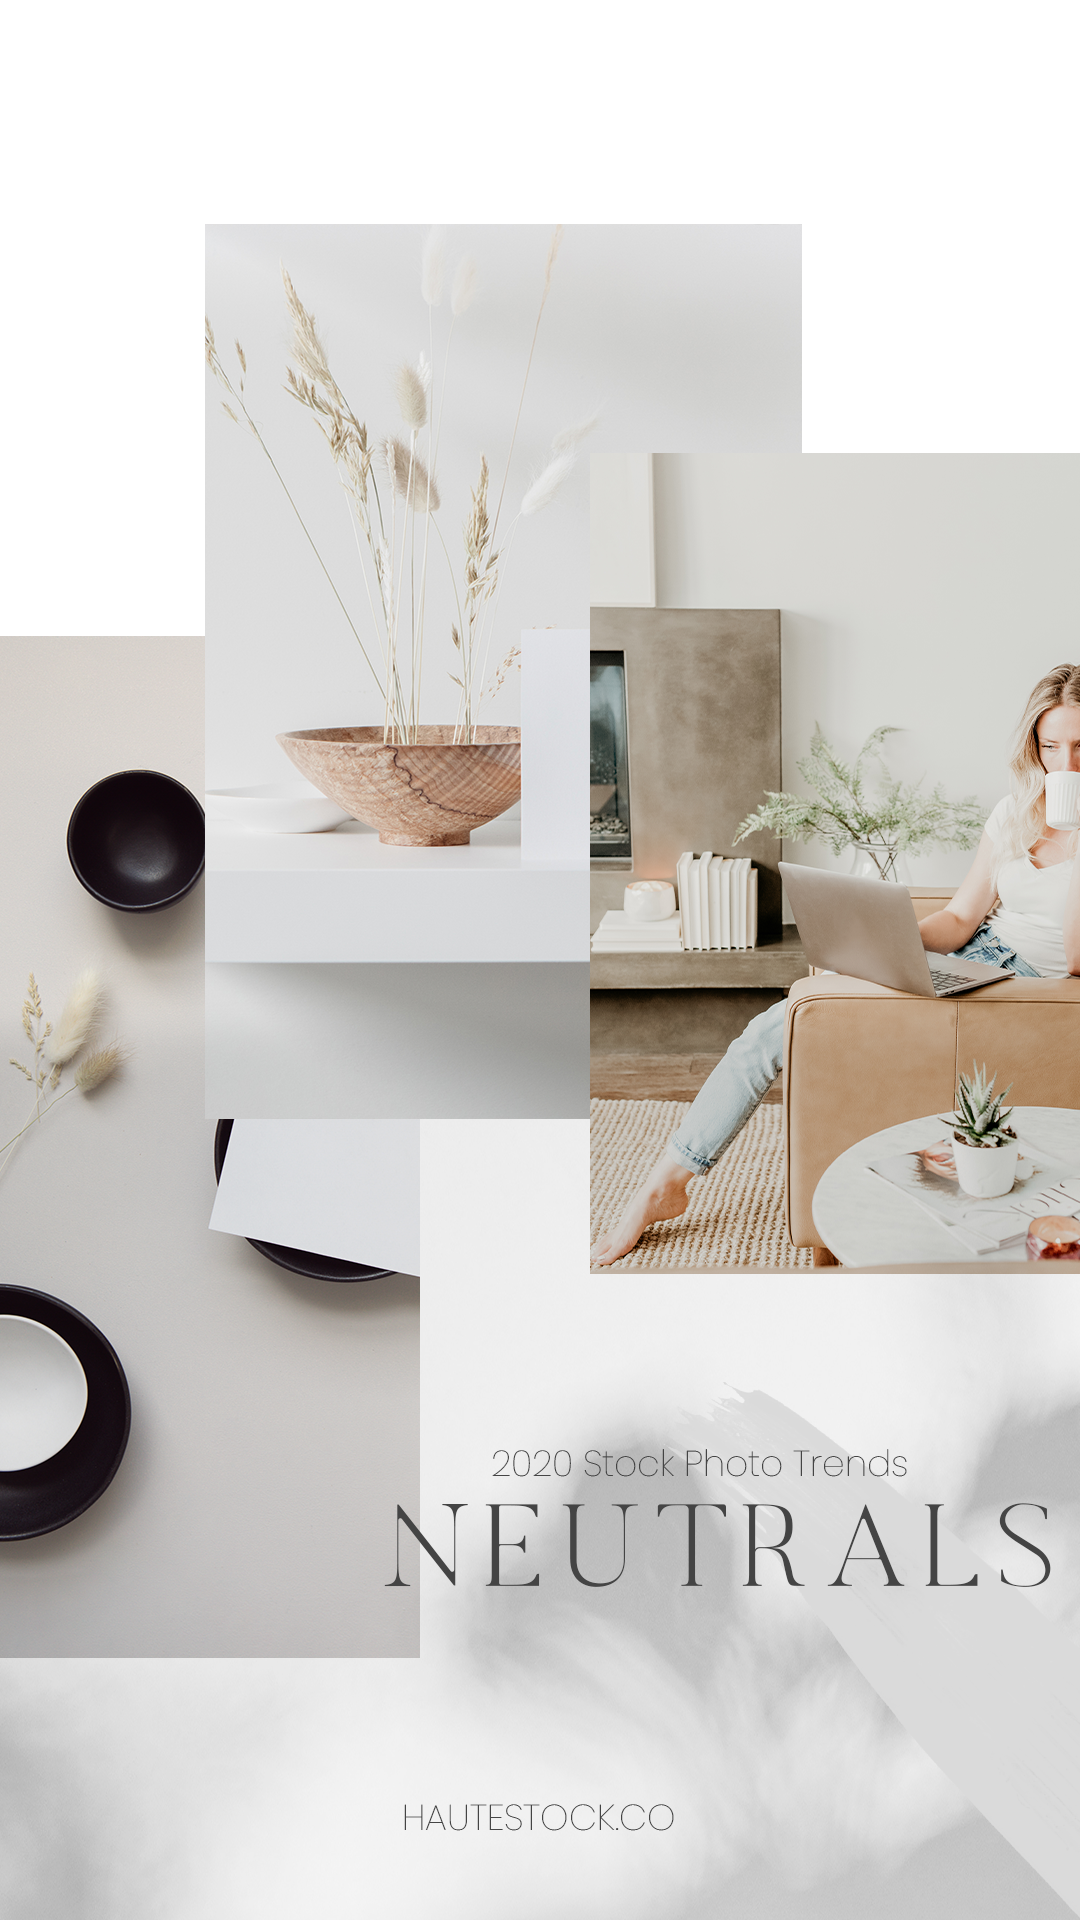 Haute Stock Member Tip: Use the “NEUTRALS” color filter when browsing in the library to see all the images in this color palette.